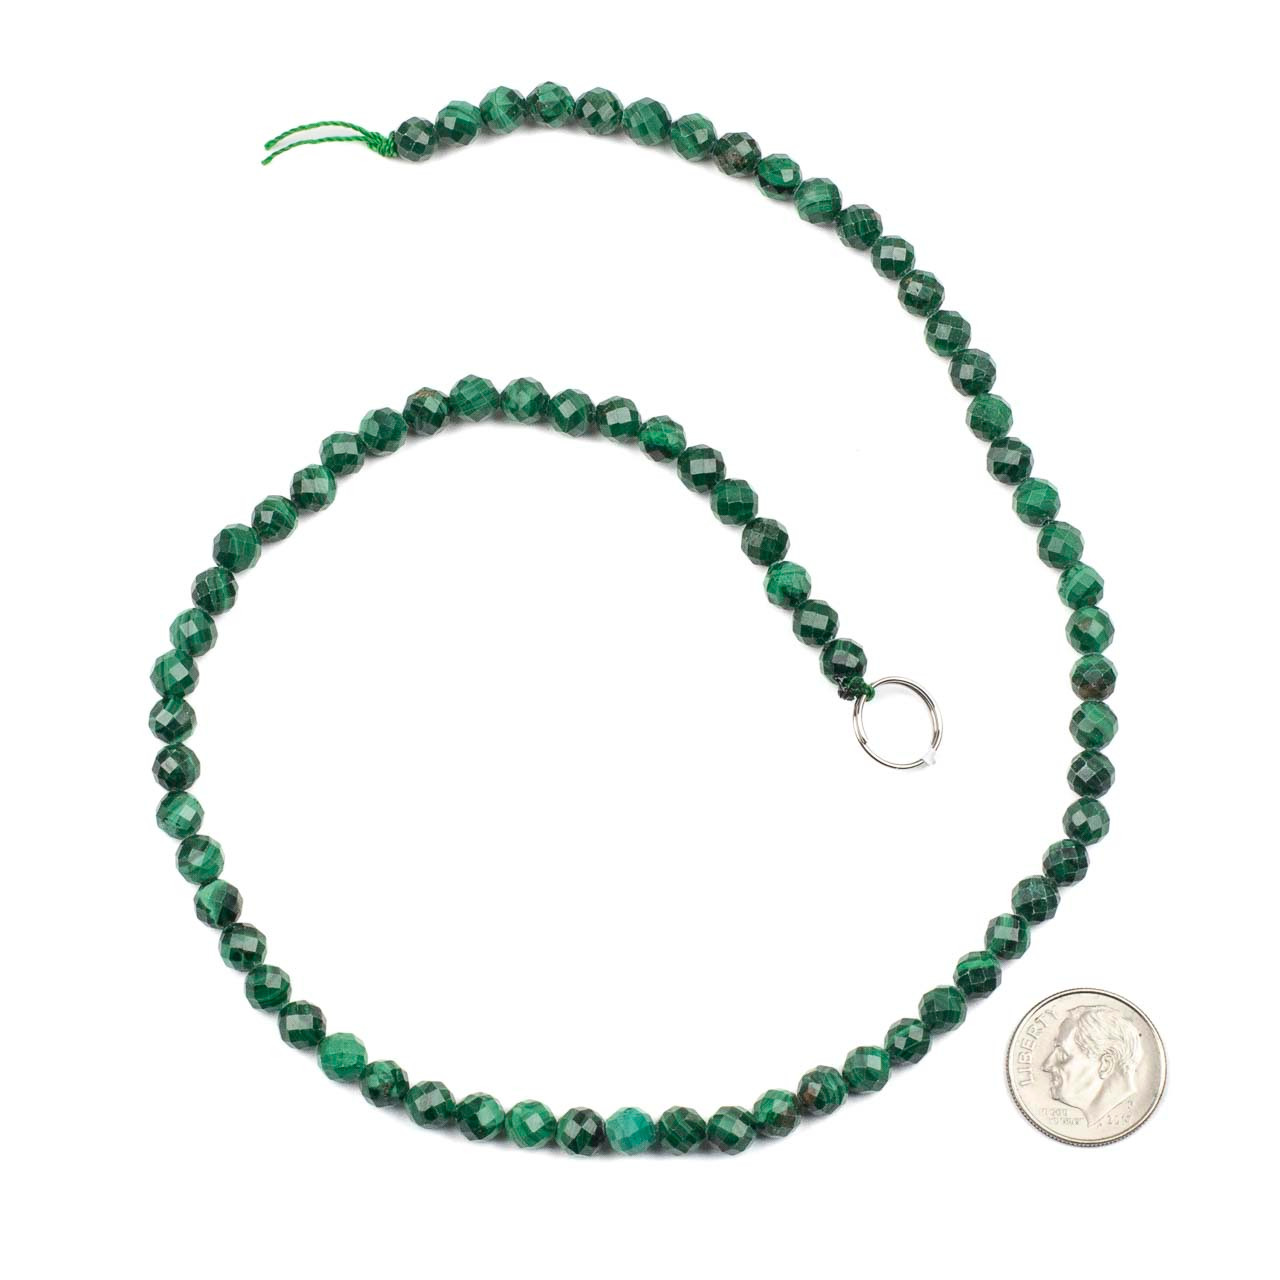 Natural Malachite 5mm Faceted Round Beads - 15 inch strand